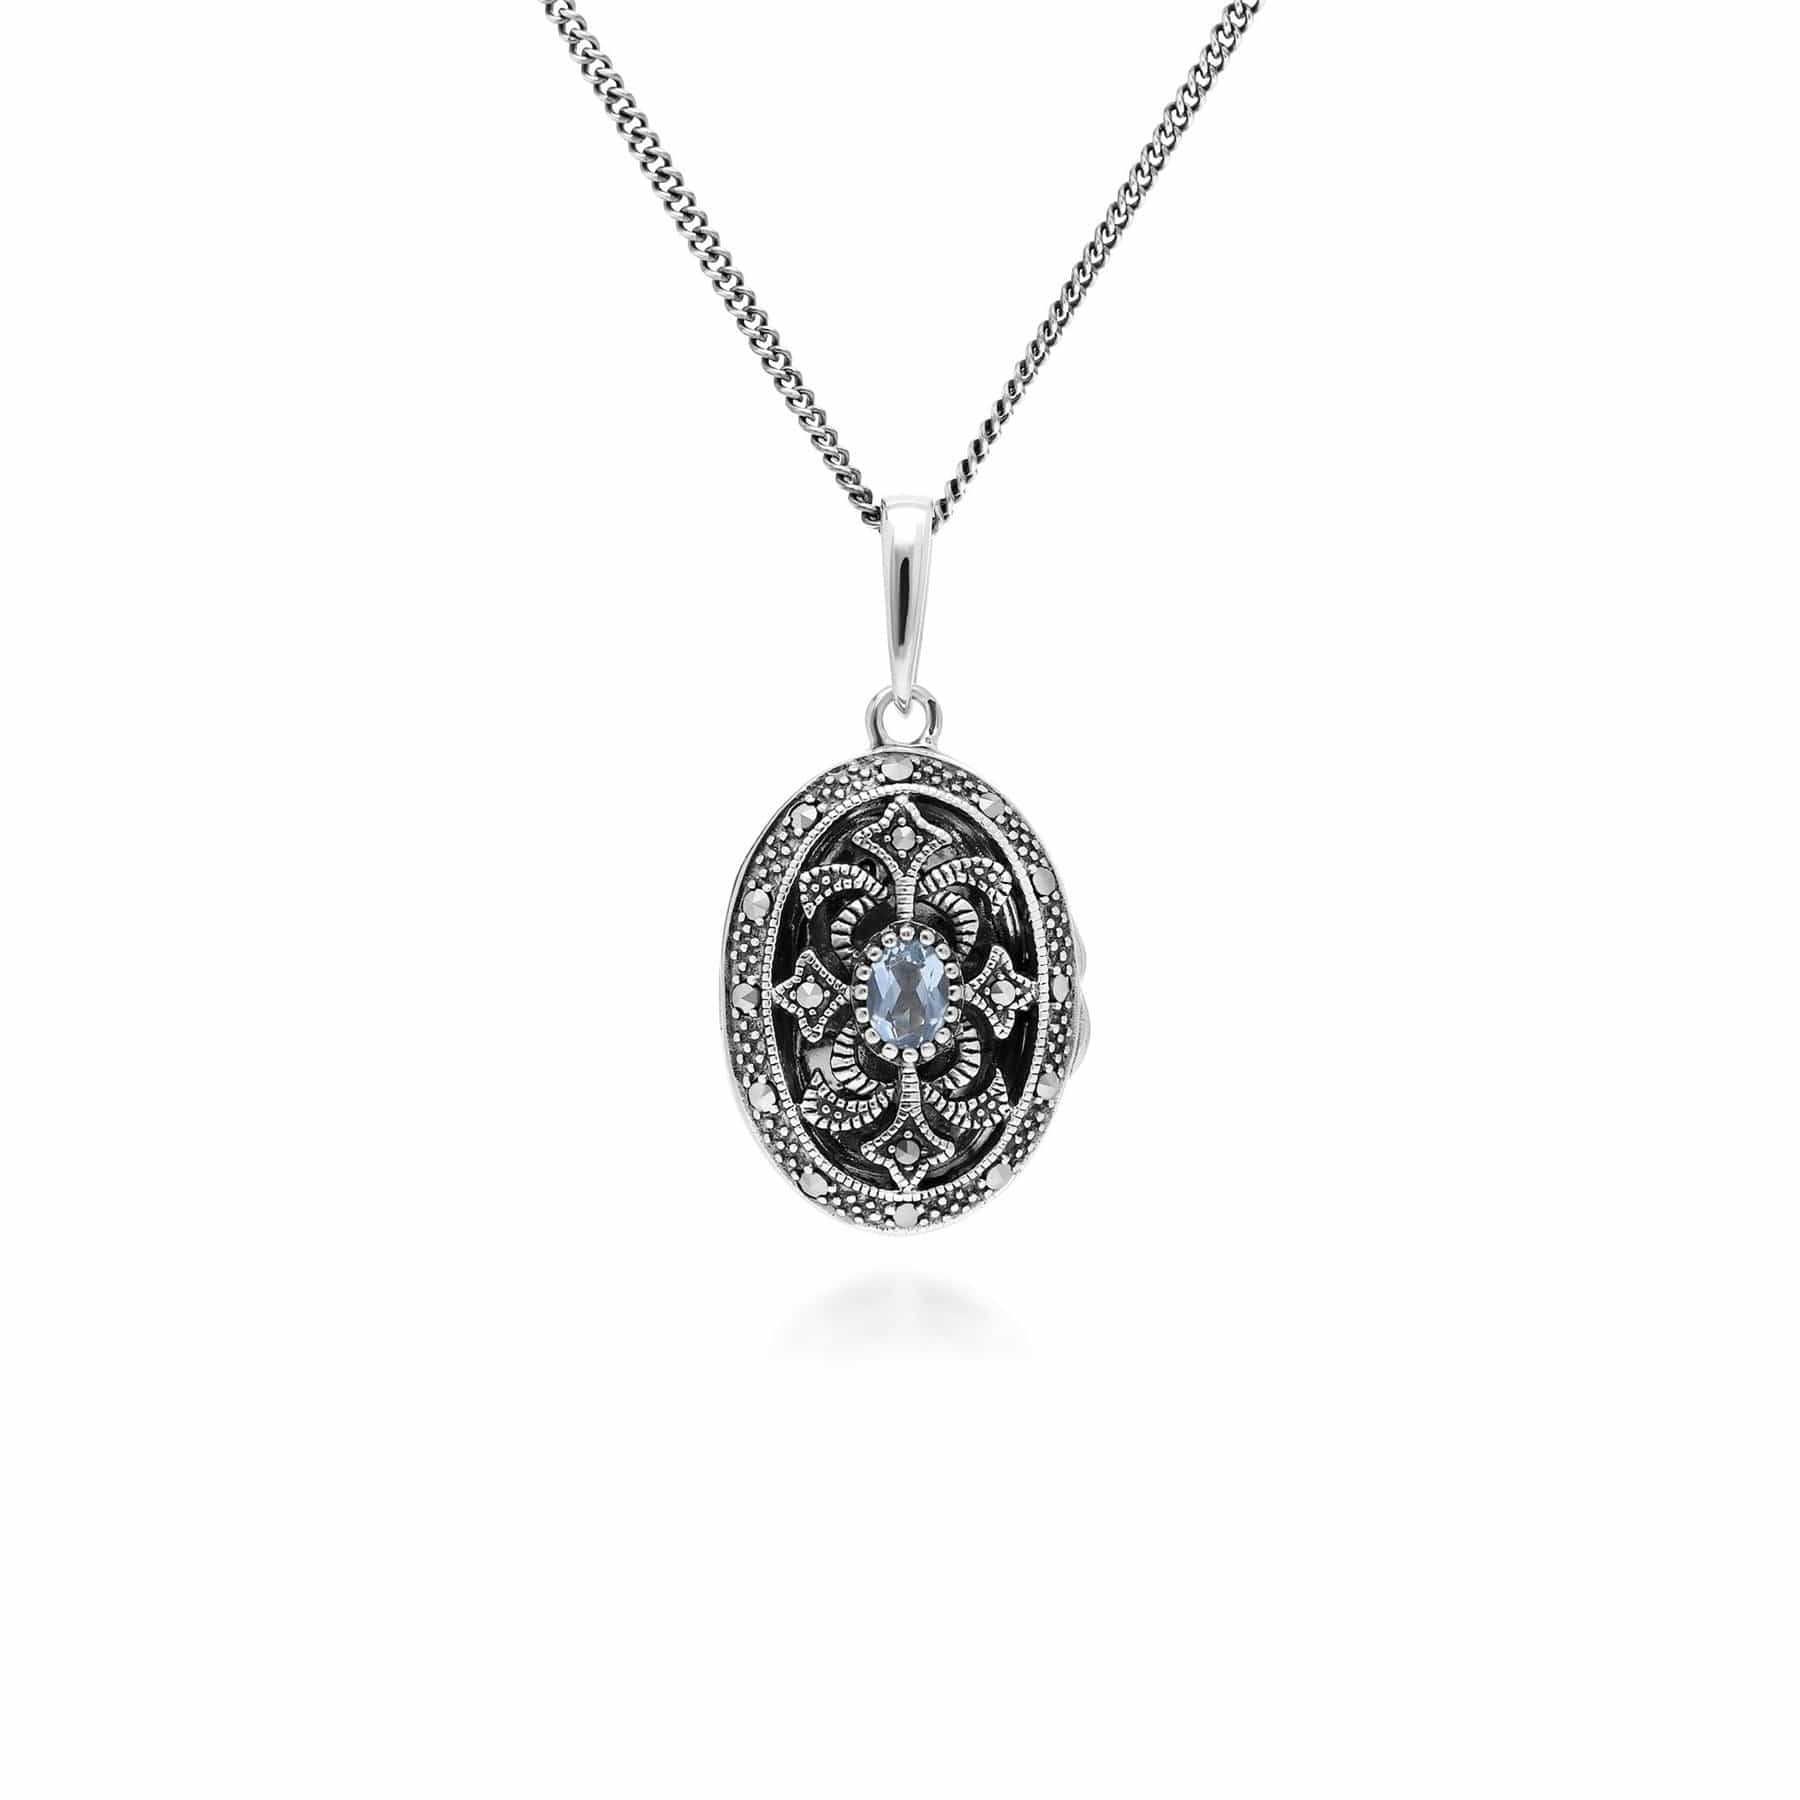 214N716208925 Art Nouveau Style Oval Topaz & Marcasite Locket Necklace in 925 Sterling Silver 1